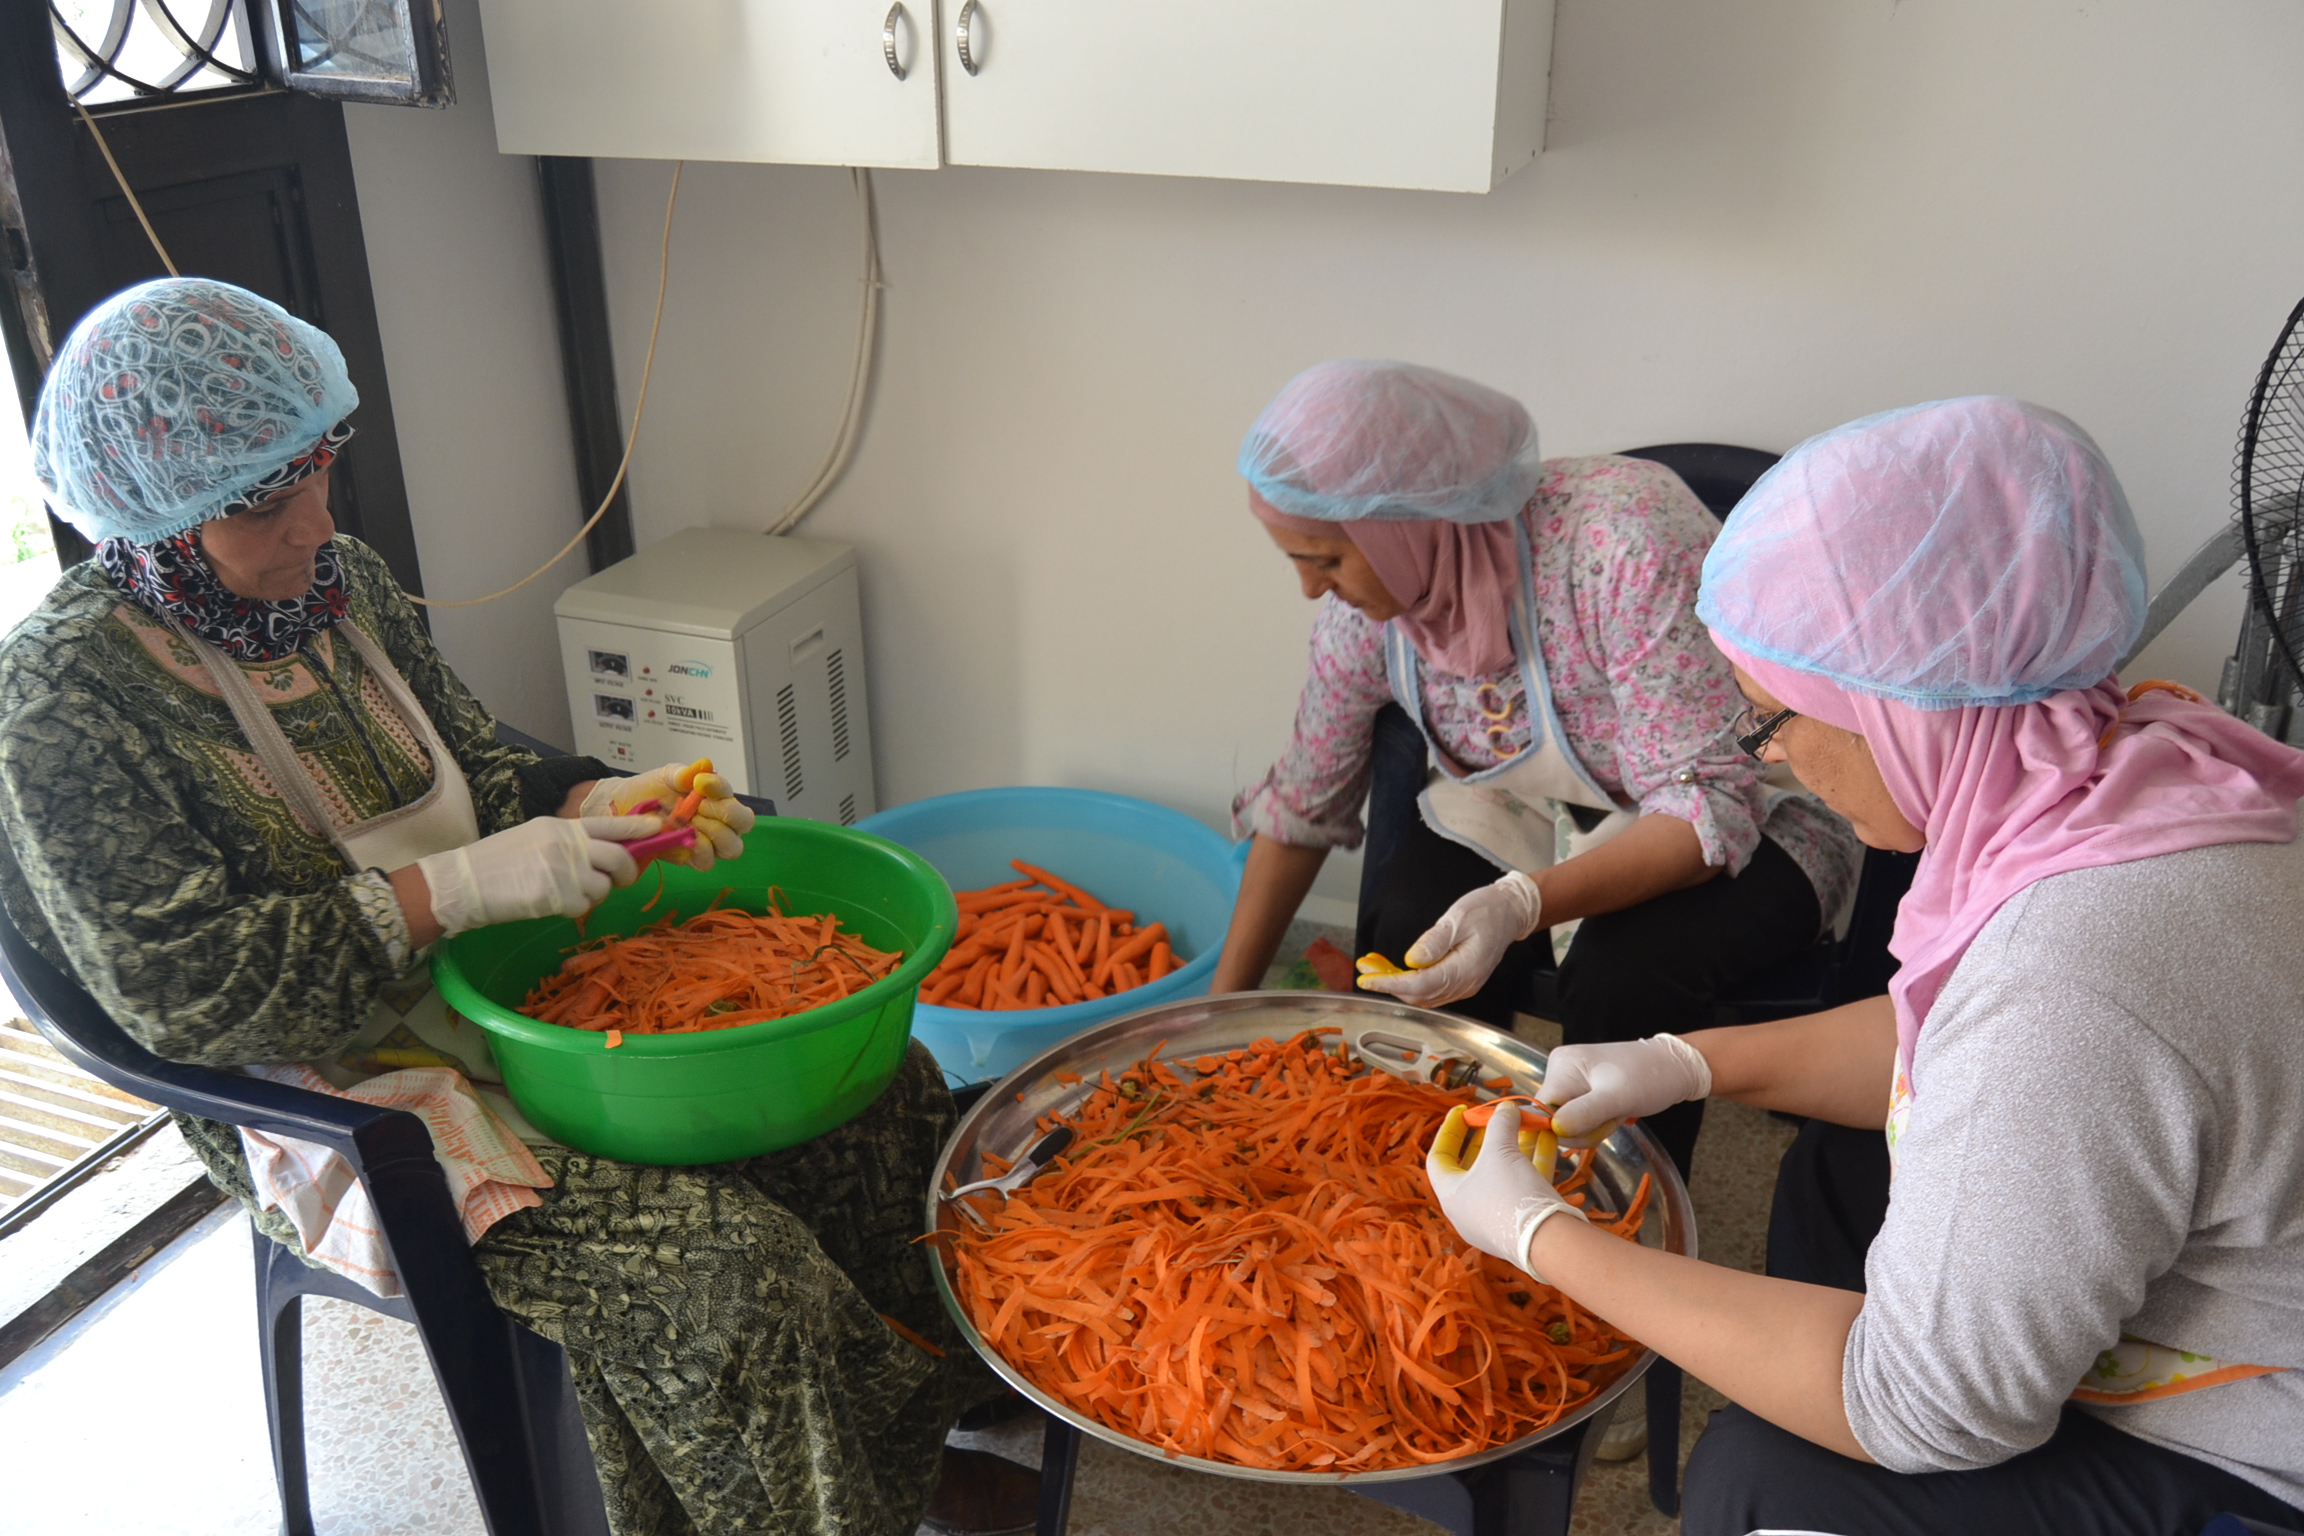 Syrian and Lebanese women work together to prepare food in the community kitchen project